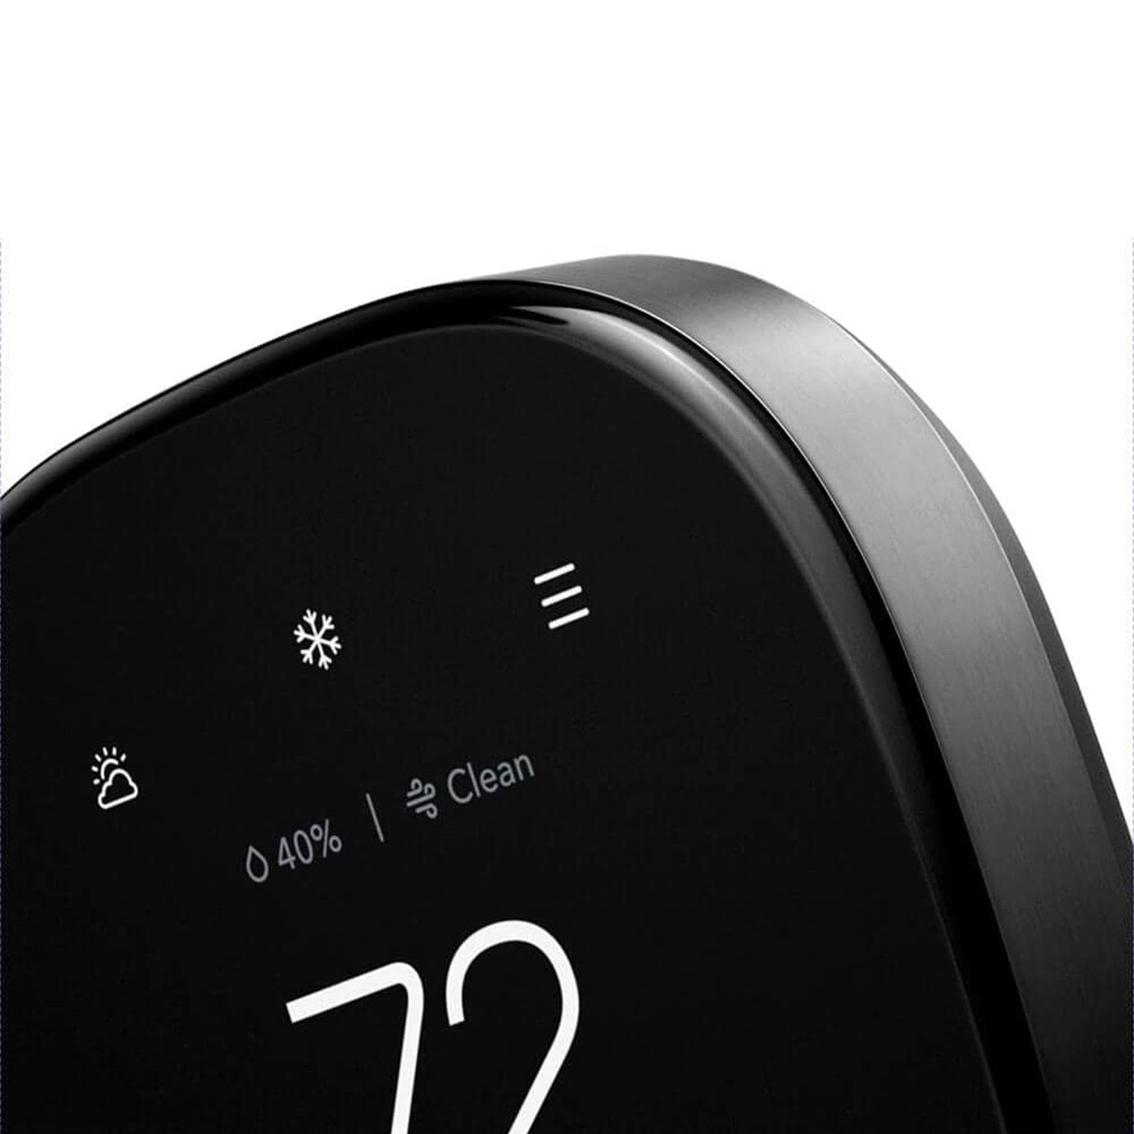 Ecobee Premium Smart Programmable Touch Screen Thermostat - Image 5 of 6